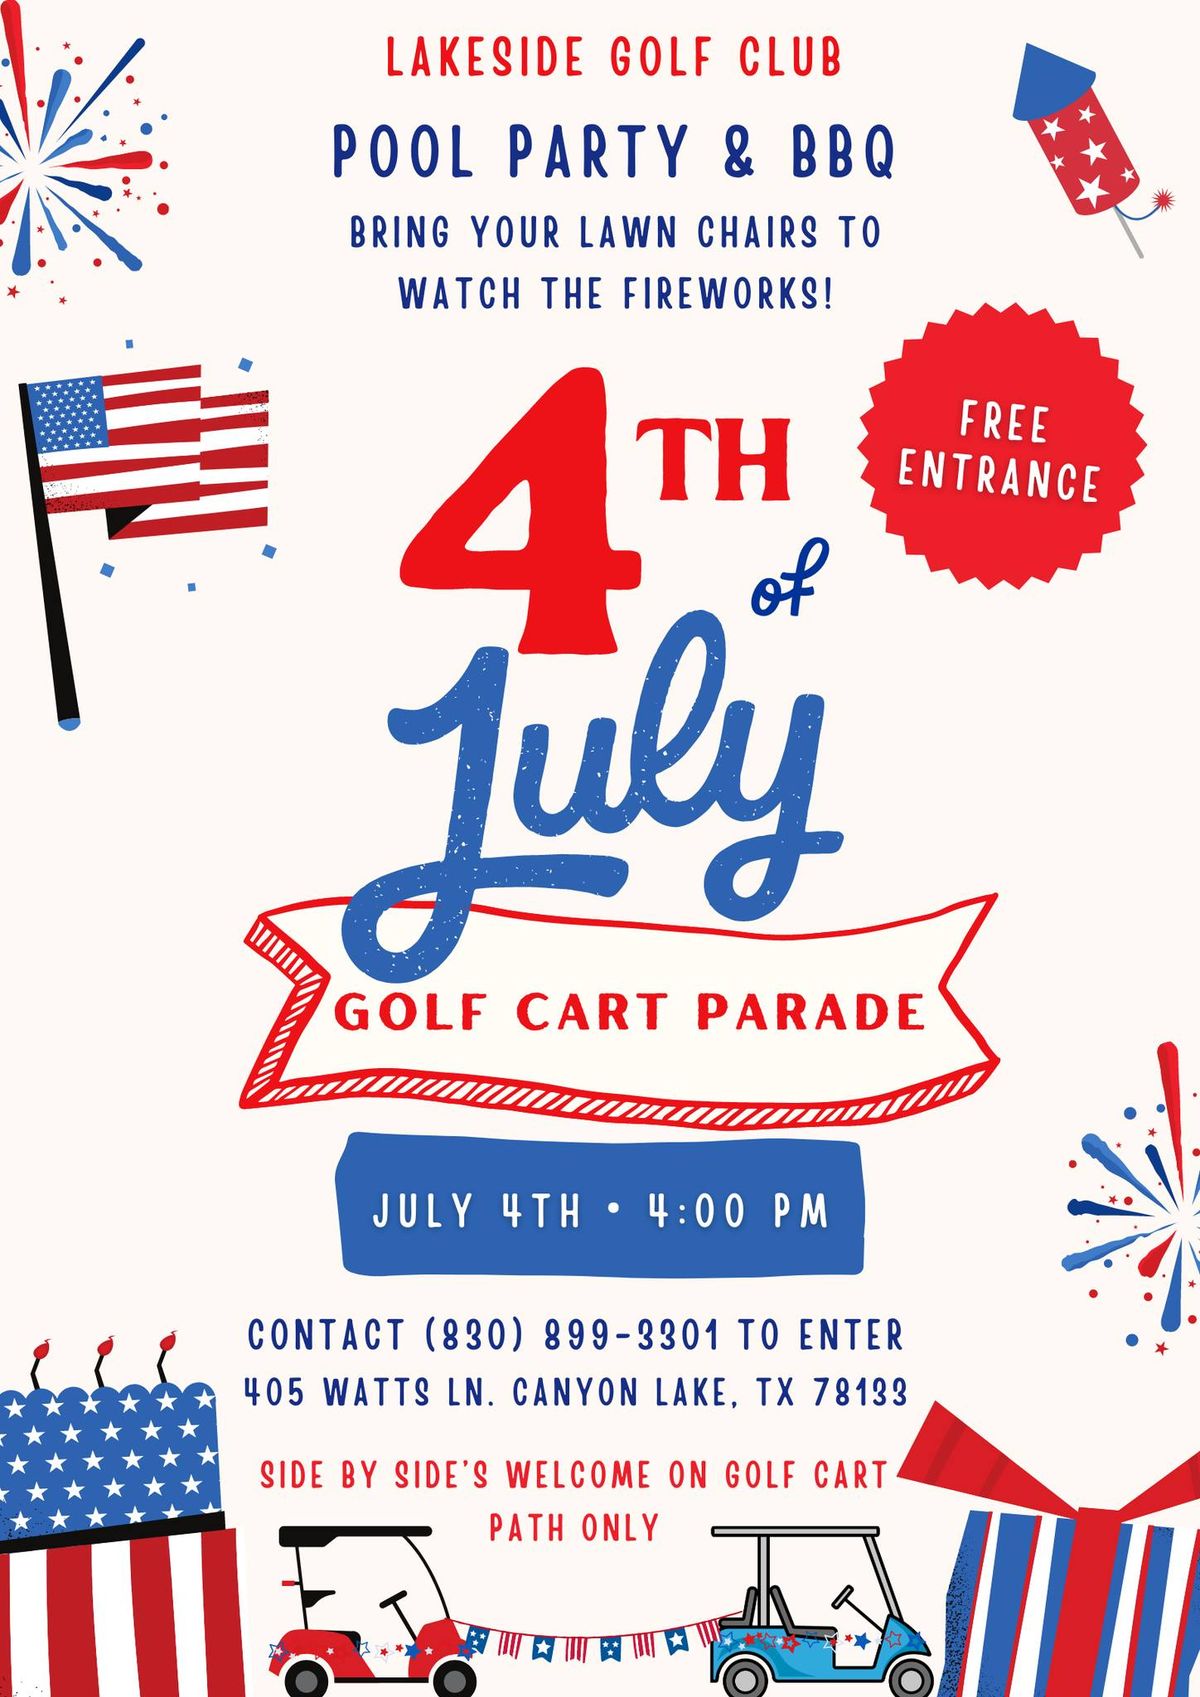 4TH OF JULY GOLF CART PARADE & PARTY!!